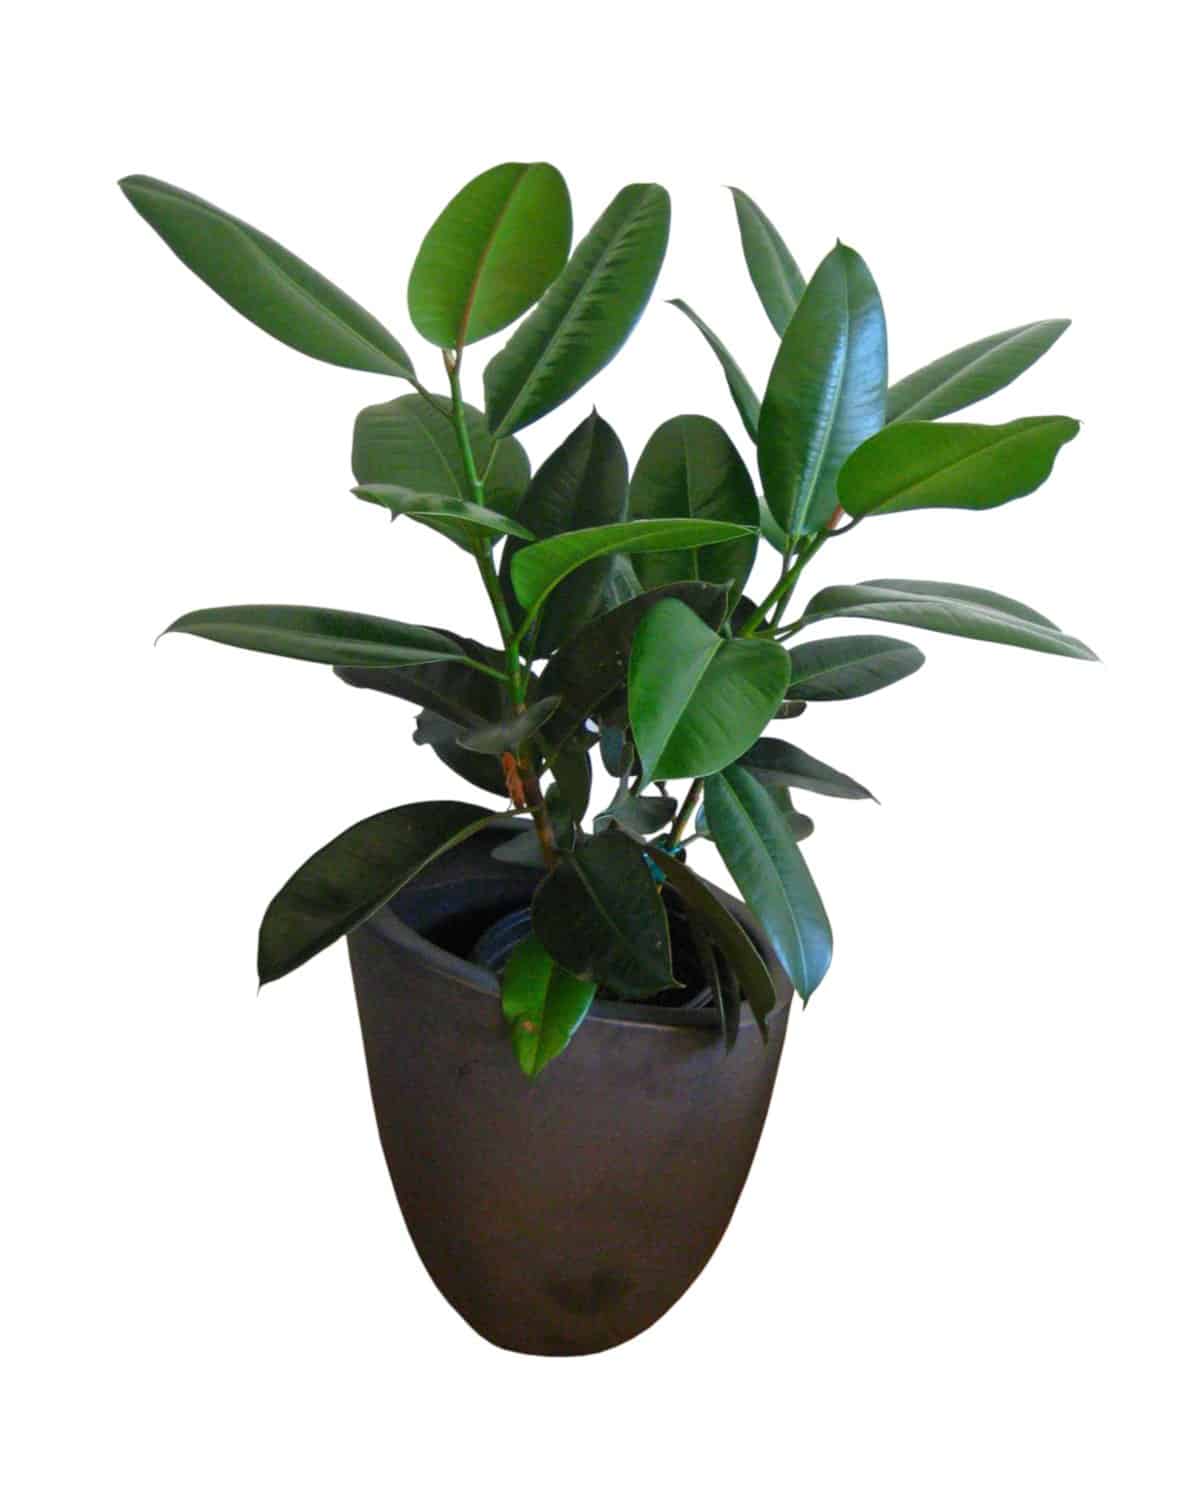 Potted ficus elastica against white background.